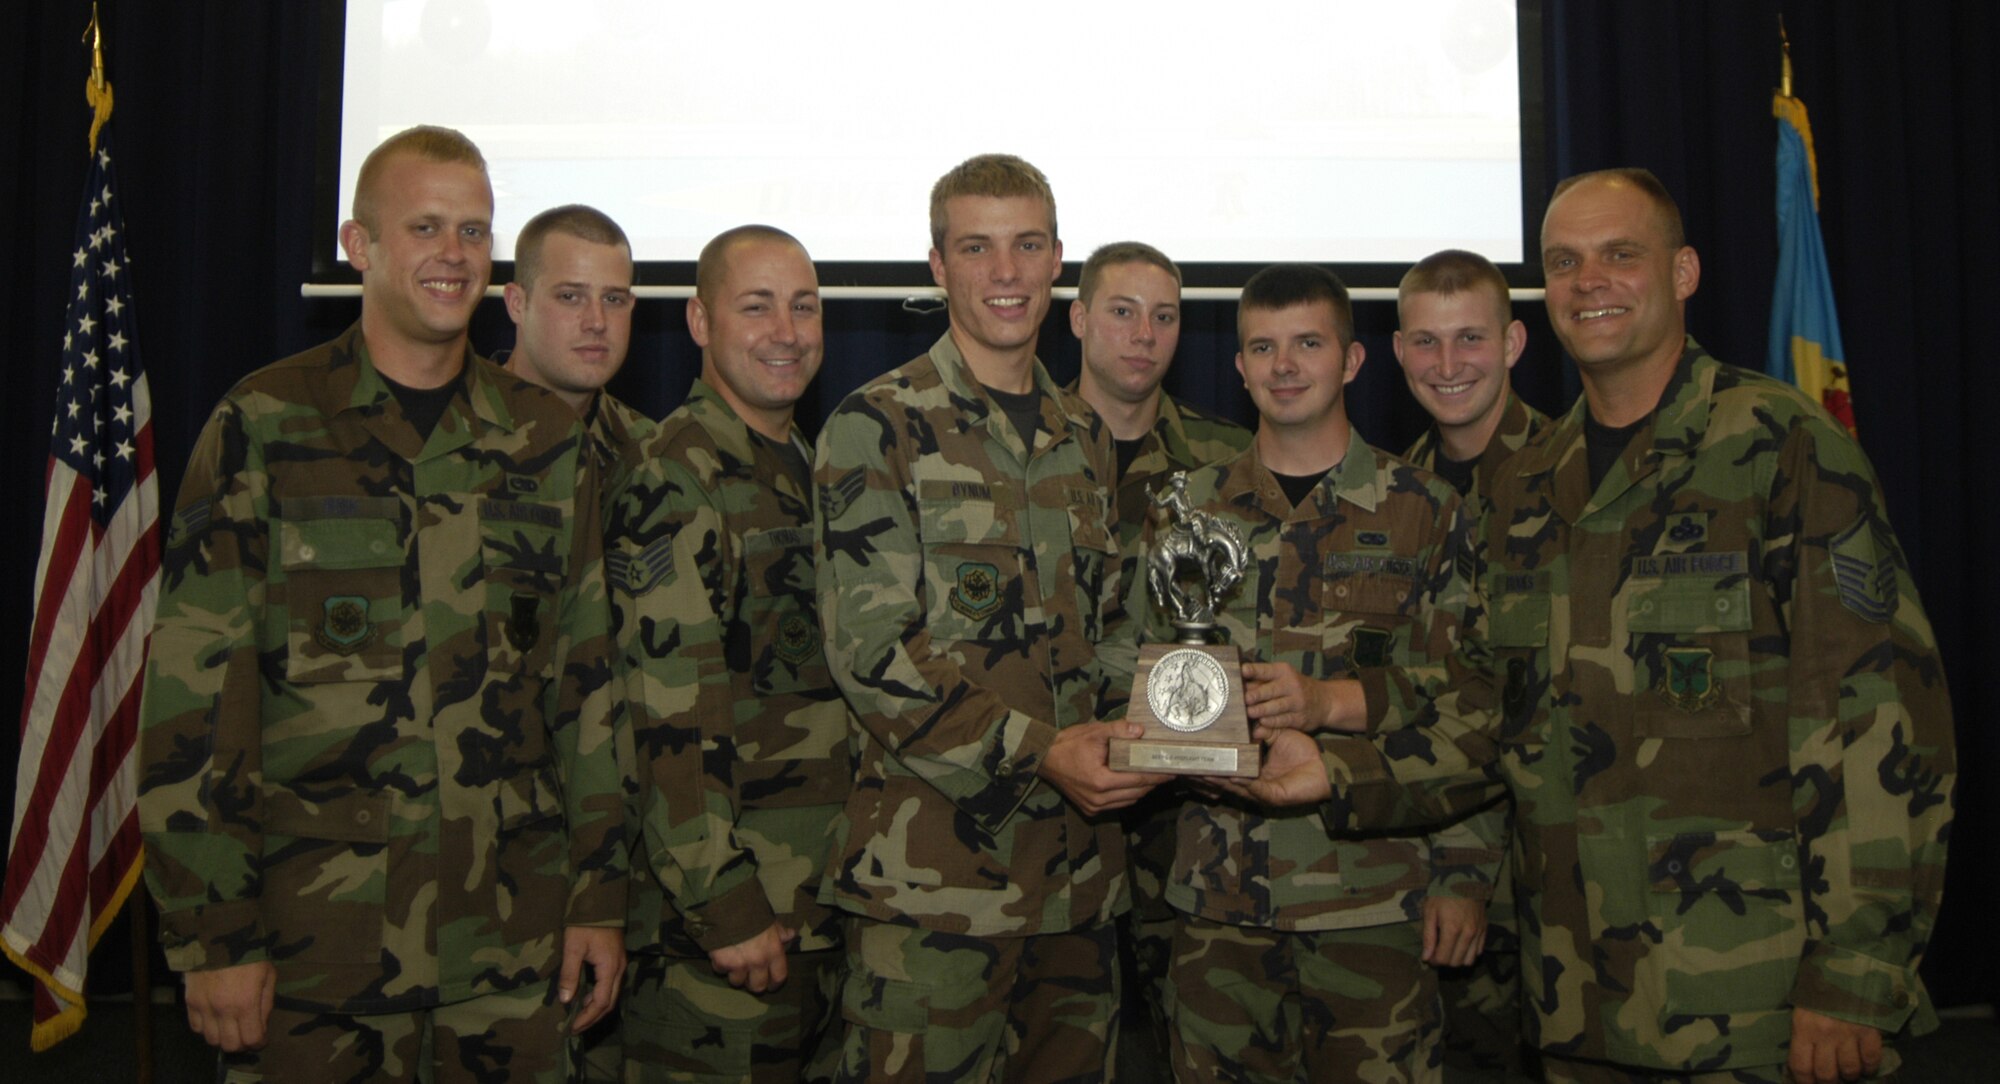 Senior Airman Andrew Fish, Staff Sgt. Michael Sessions, Staff Sgt. Robert Thomas, Senior Airman Daniel Bynum, Senior Airman Christopher Renken, Senior Airman Christopher May, 1st Lt. Steven Donovan and Master Sgt. Michael Brooks were recognized as the Best C-5 Preflight team at the Air Mobility Rodeo 2007. Not shown here, but part of the award-winning Team Dover Rodeo maintenance team: Senior Airman Benjamin Drage and Staff Sgt. Mark Rose. (U.S. Air Force photo/Airman Shen-Chia Chu)